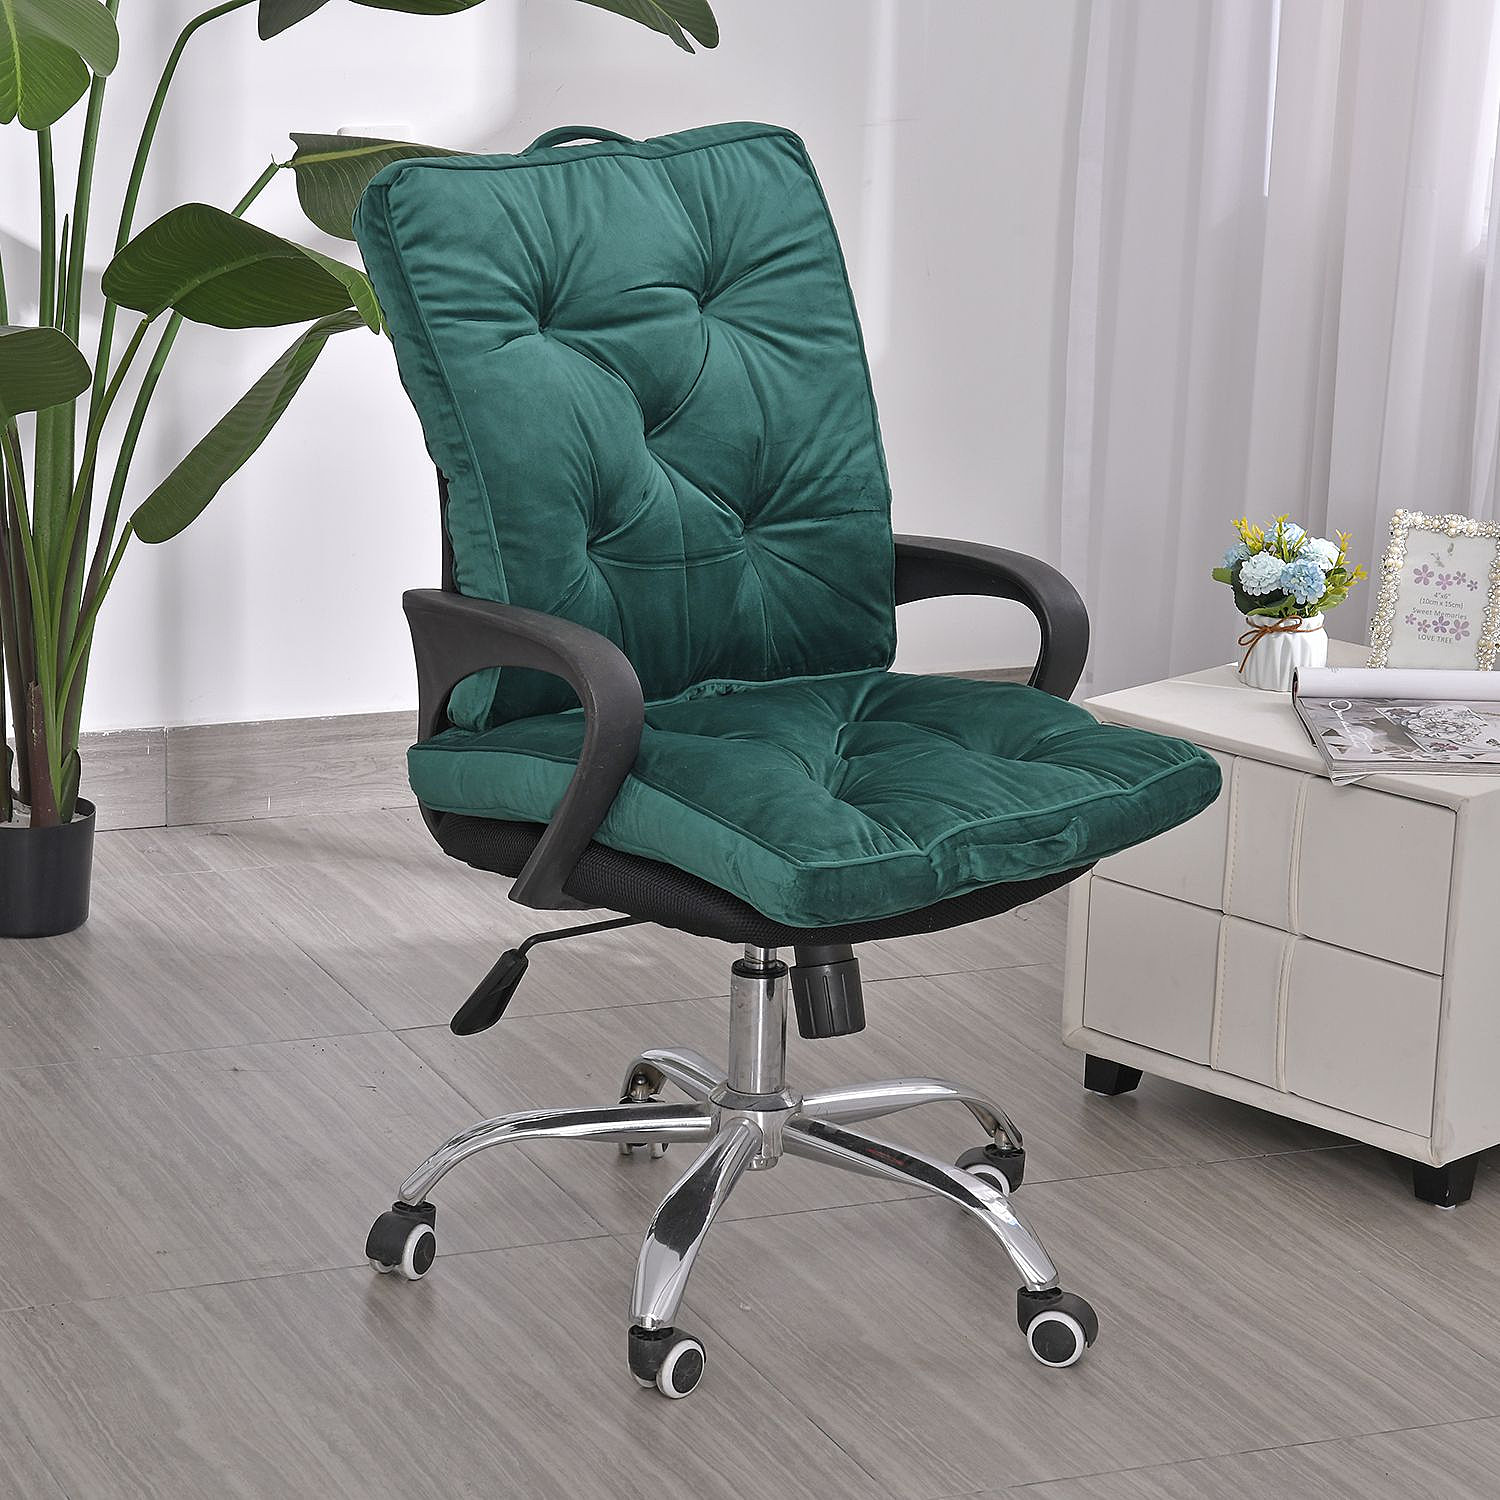 Back-Support-Armchair-Booster-Cushion-Size-50x8-cm-Green